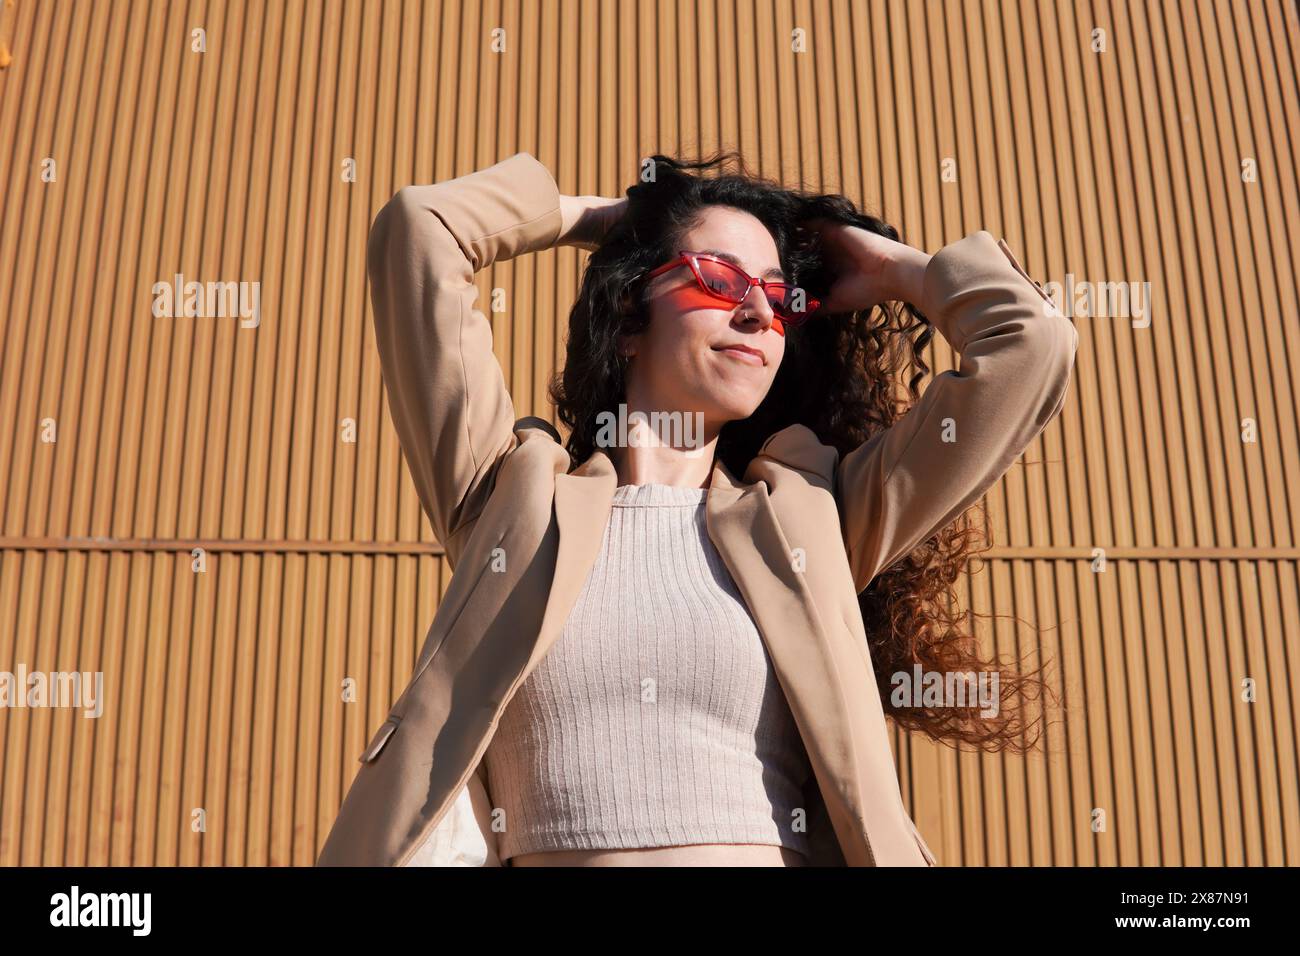 Woman with curly hair wearing red sunglasses on sunny day Stock Photo